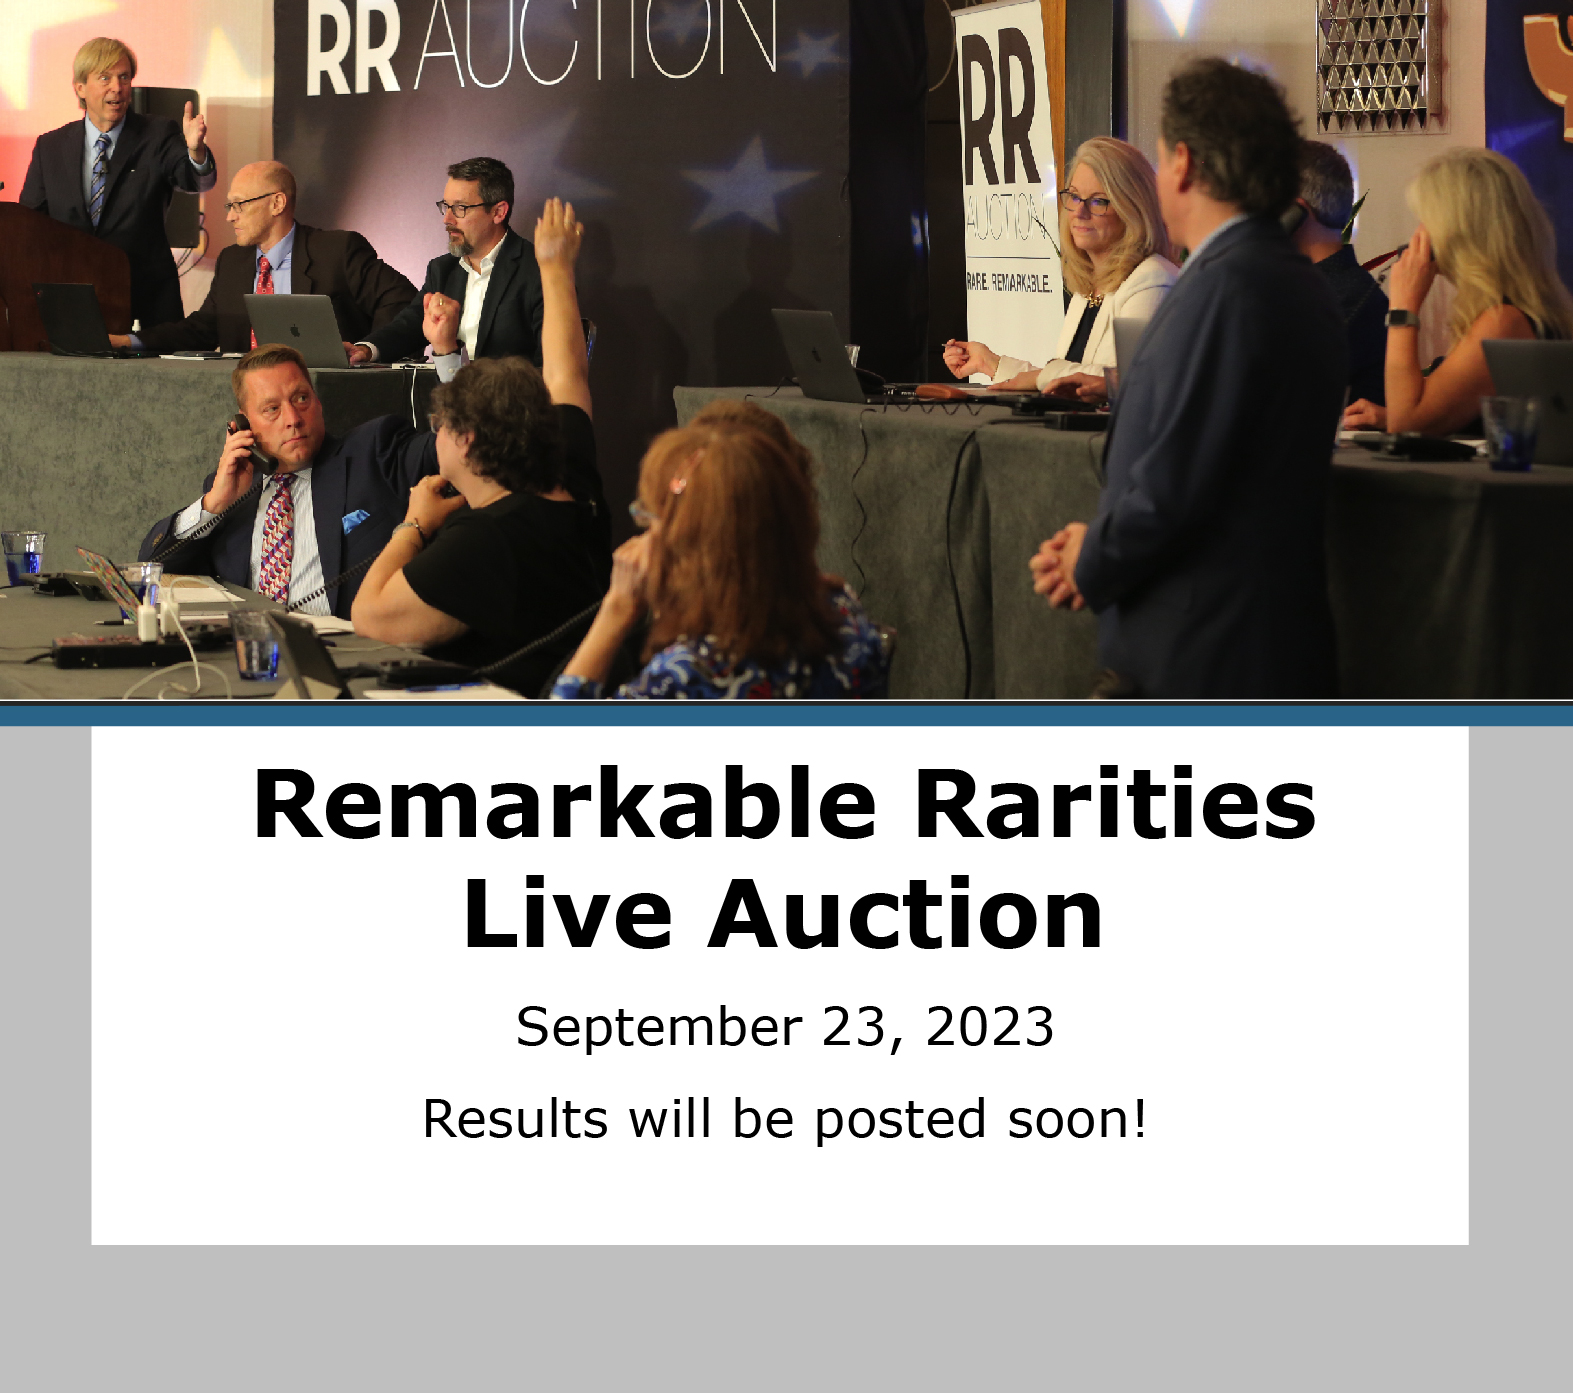 Remarkable Rarities Live Auction is September 23rd. Results will be posted soon!